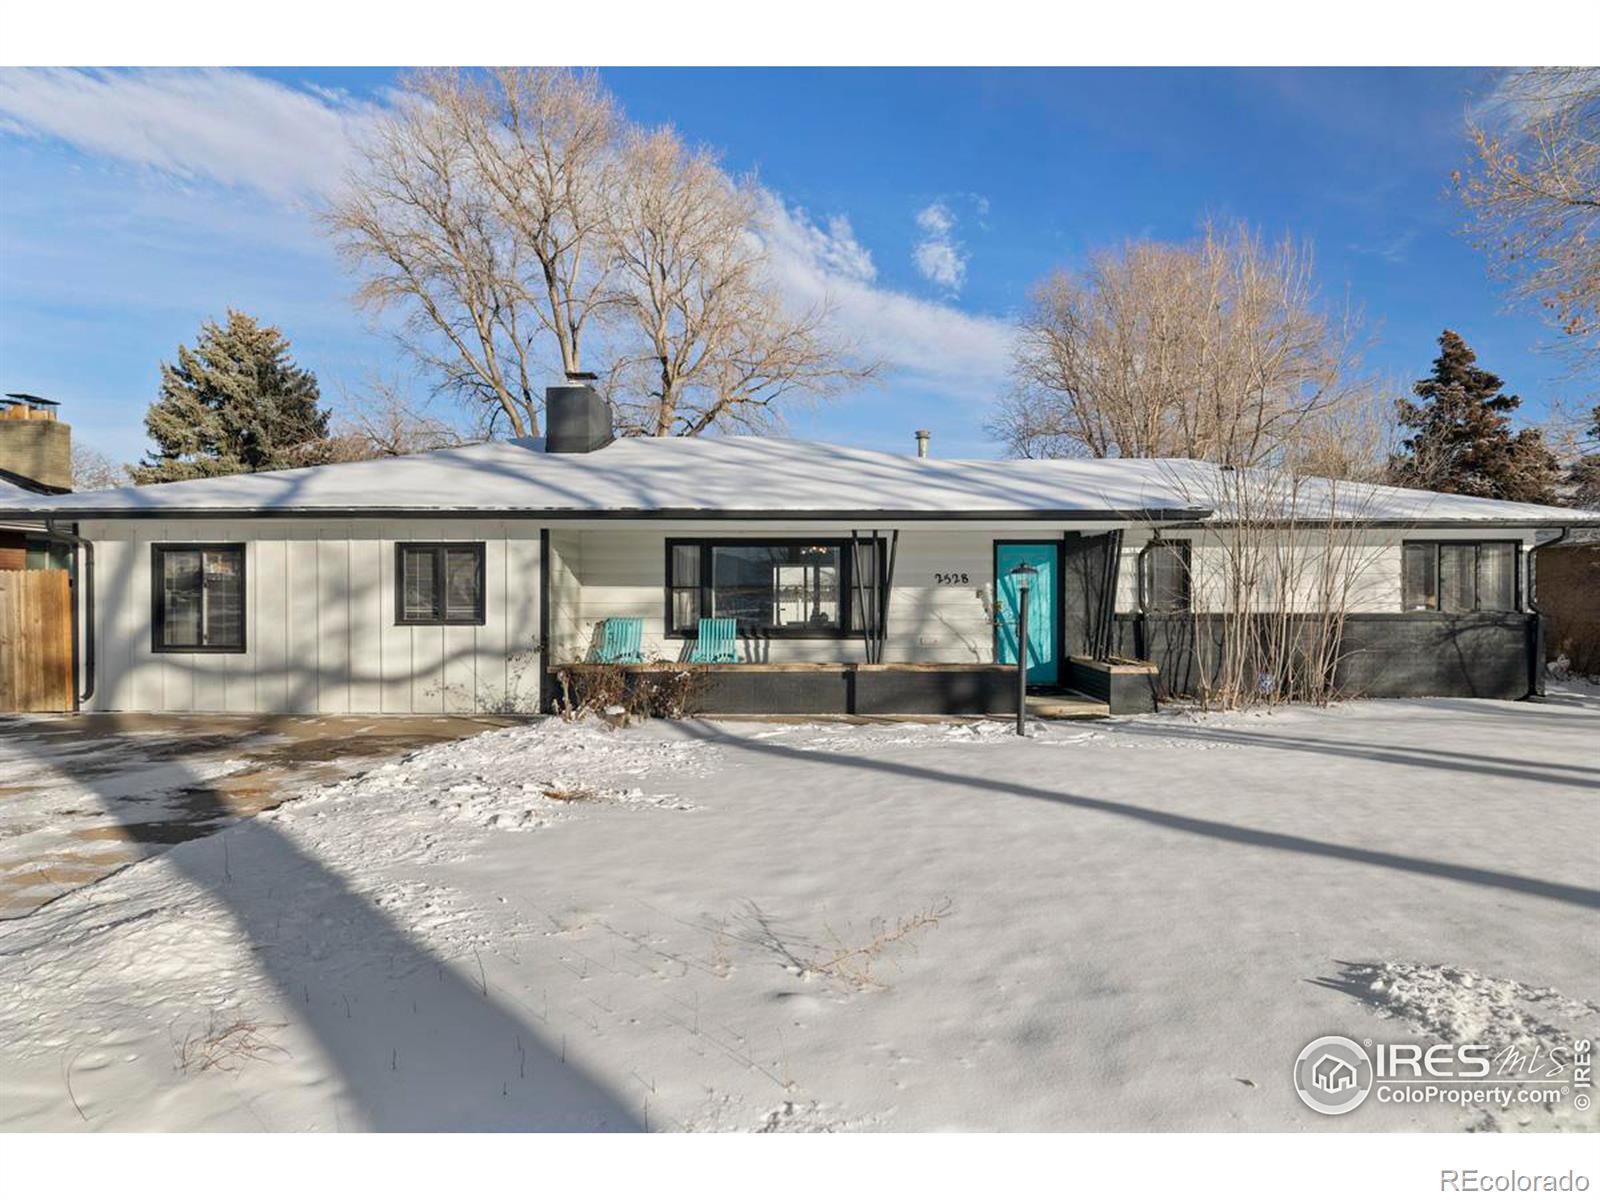 2528 S College Avenue, fort collins MLS: 4567891001735 Beds: 3 Baths: 3 Price: $575,000